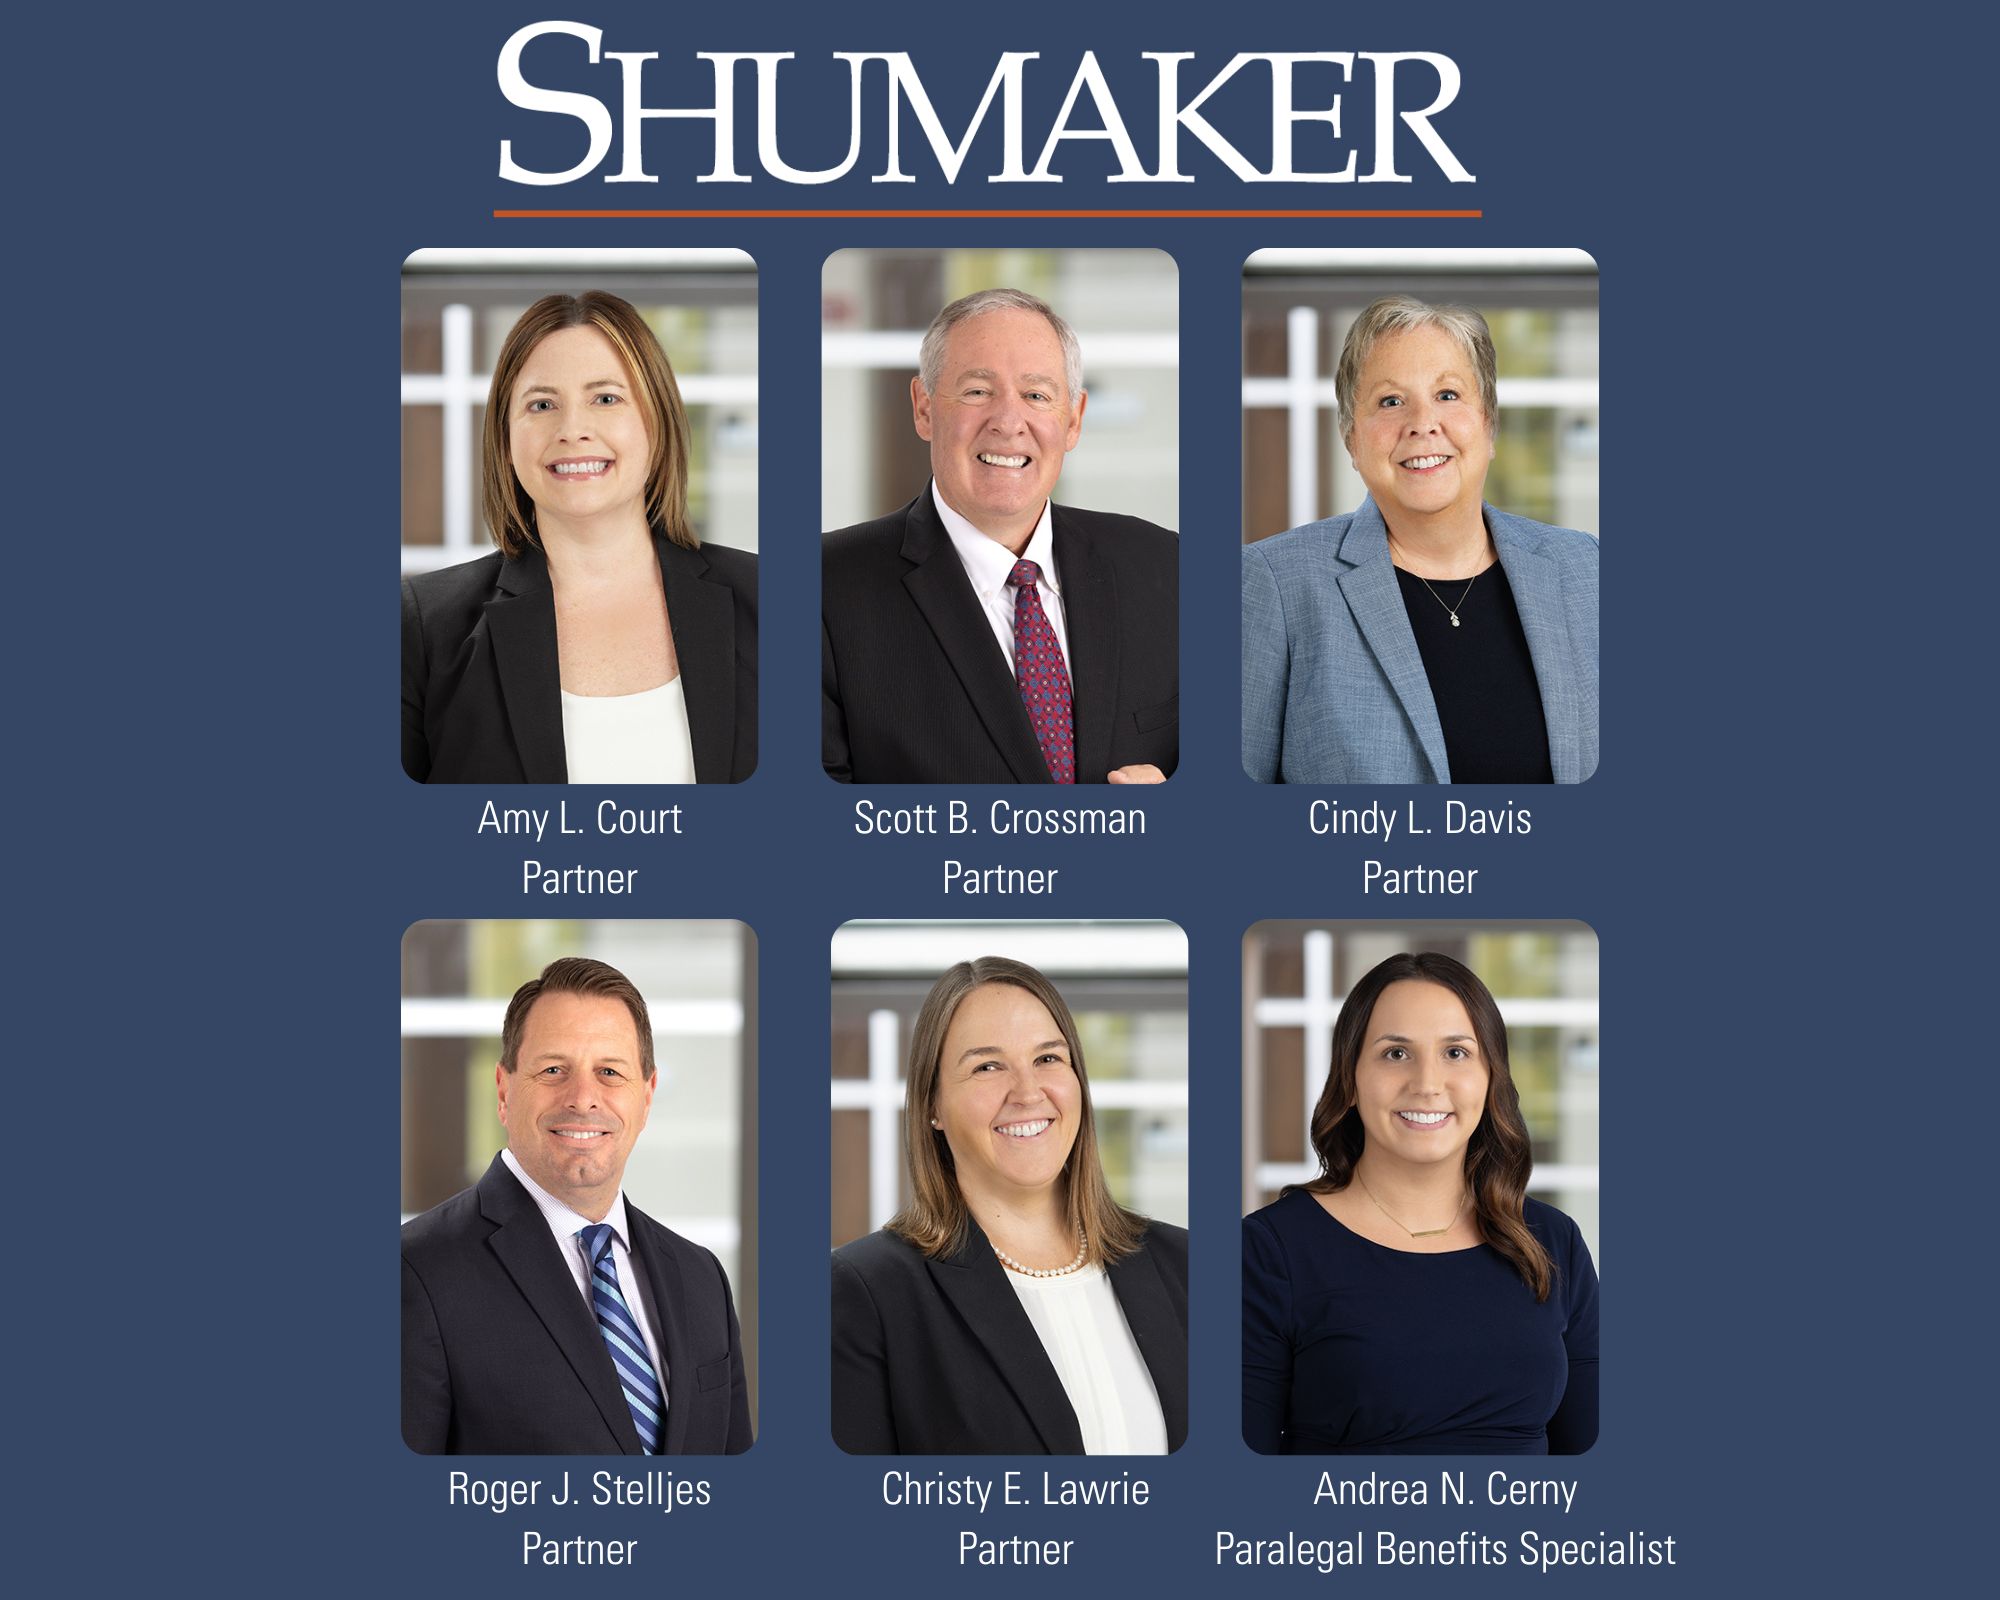 Shumaker Strengthens Employee Benefits Team with Addition of Two Groups of Highly Skilled Attorneys